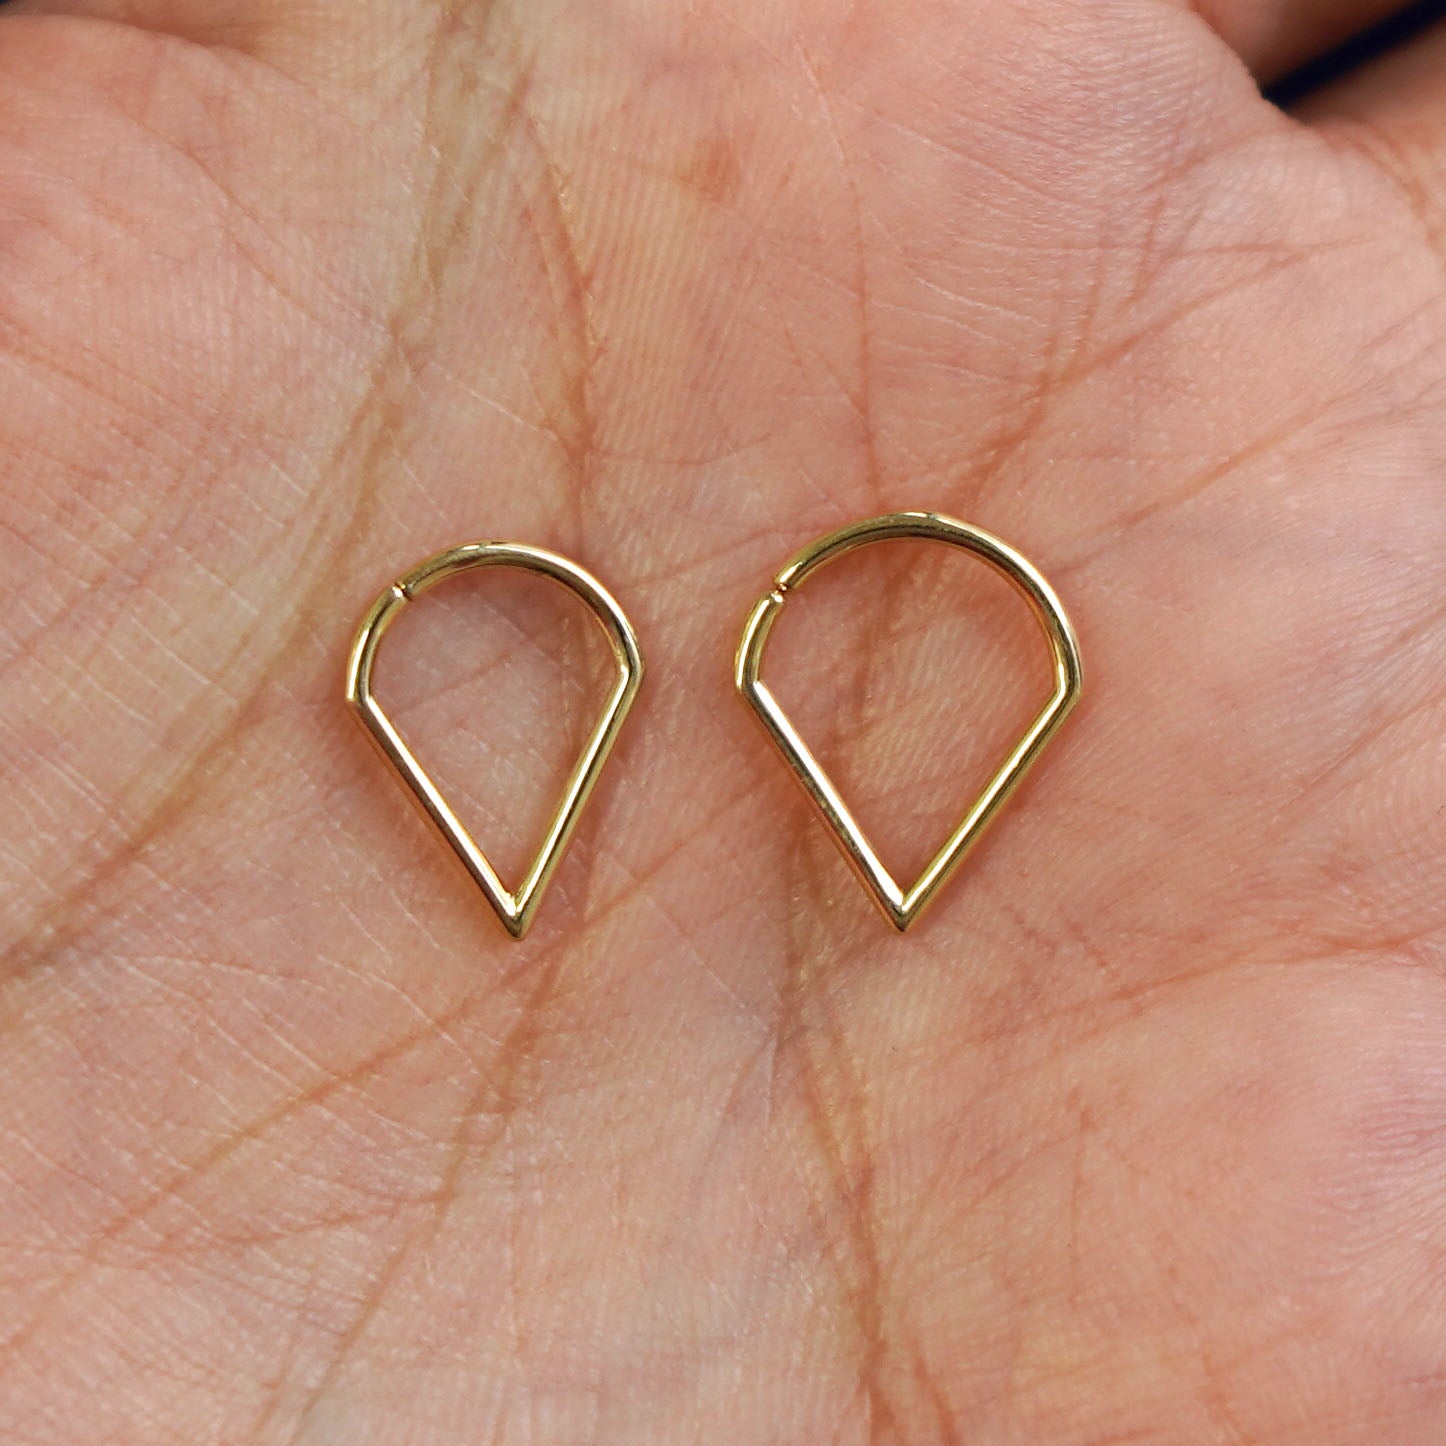 A model's palm holding two versions of the pierced Triangle Septum showing the 8mm and 10mm sizes